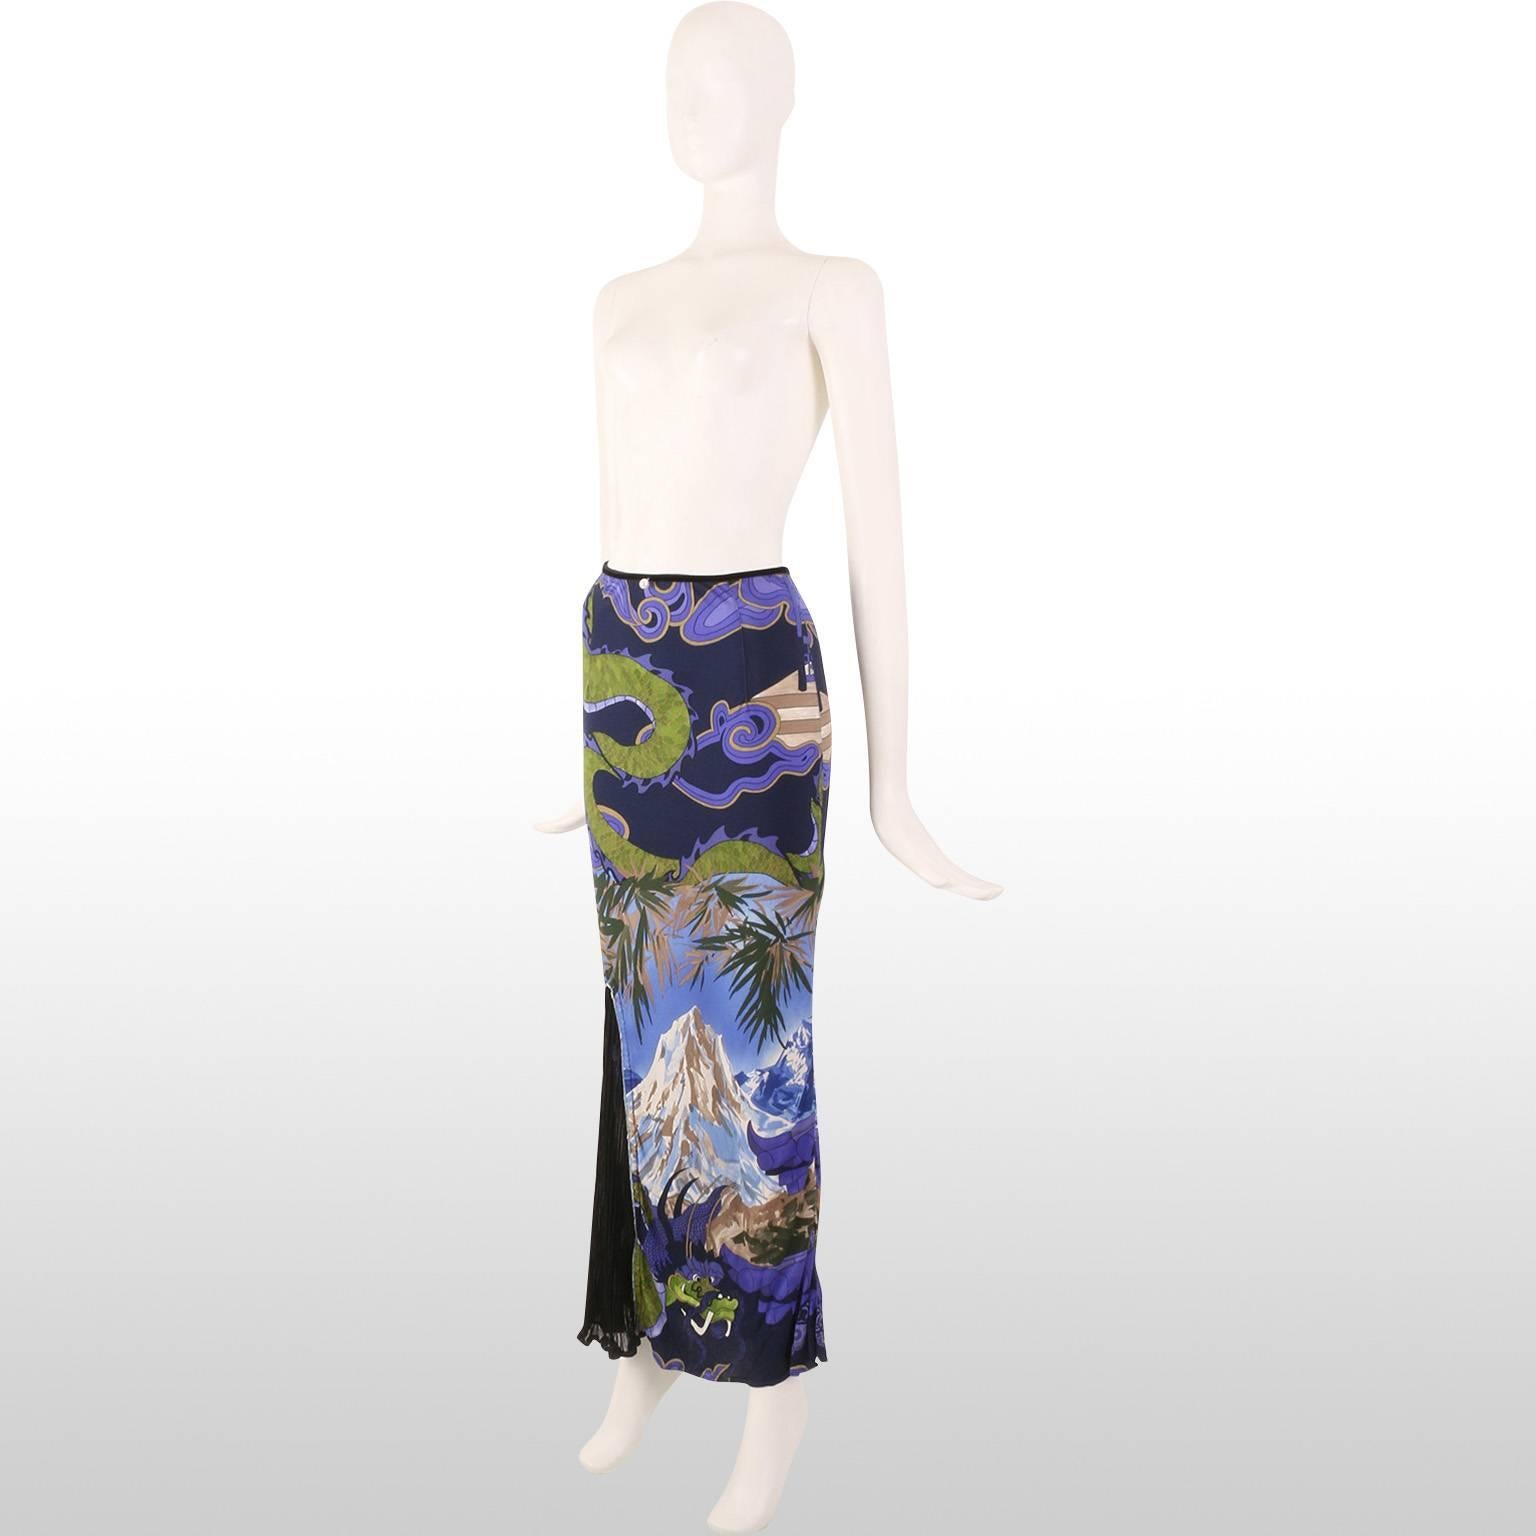 This original Voyage maxi style skirt has an eye-catching oriental pattern covering the entirety of the garment featuring dragons, mountains and bamboo leaves. The split on the side of the skirt creates a unique twist due to the use of a contrasting